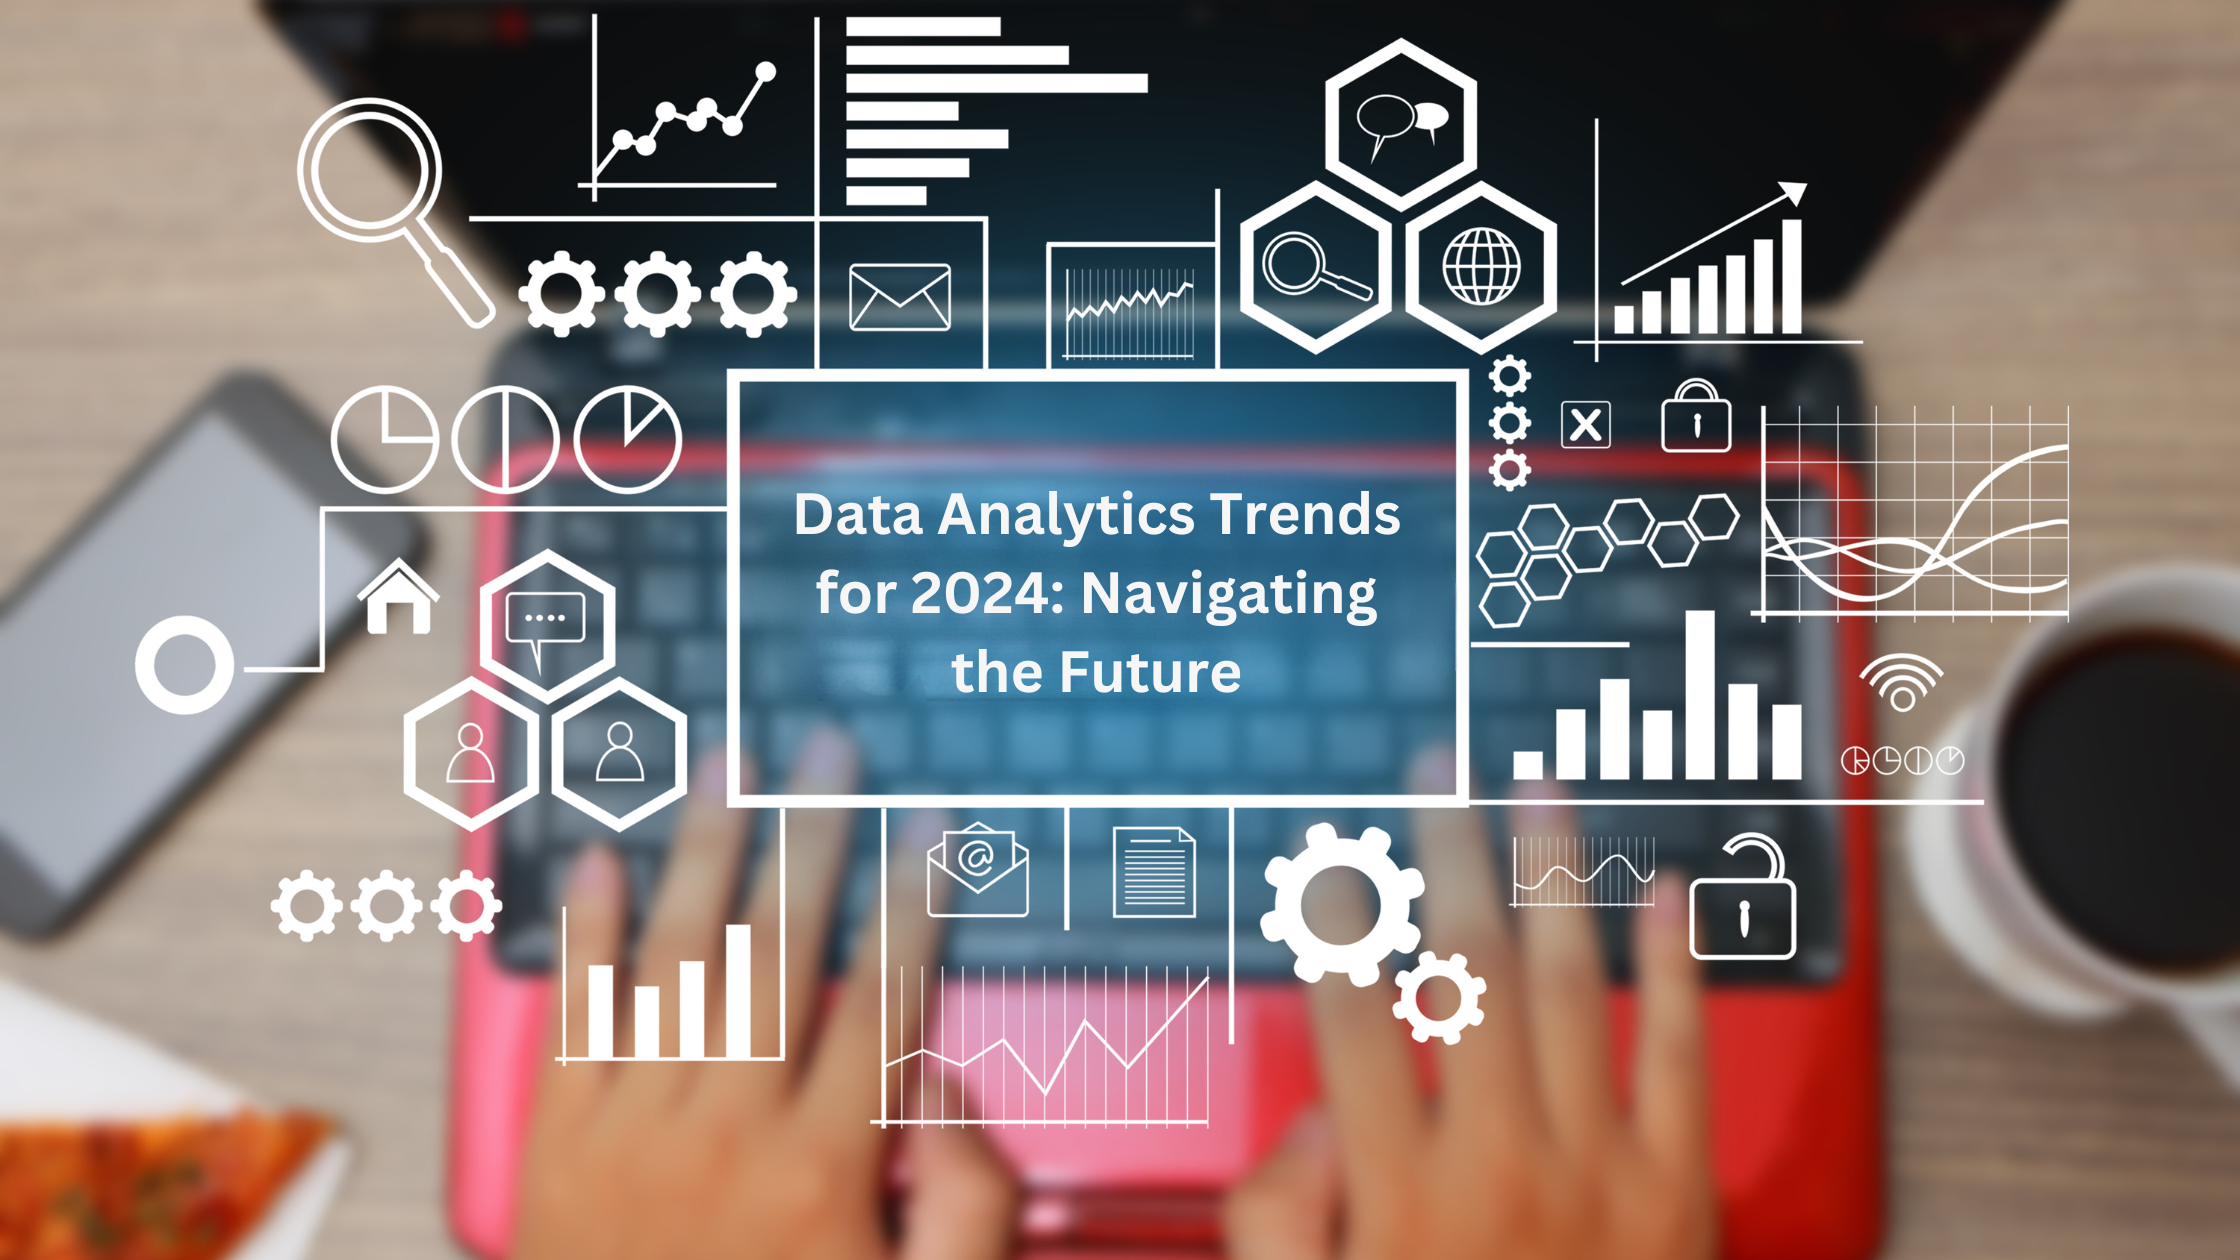 Data Analytics Trends for 2024: Navigating the Future